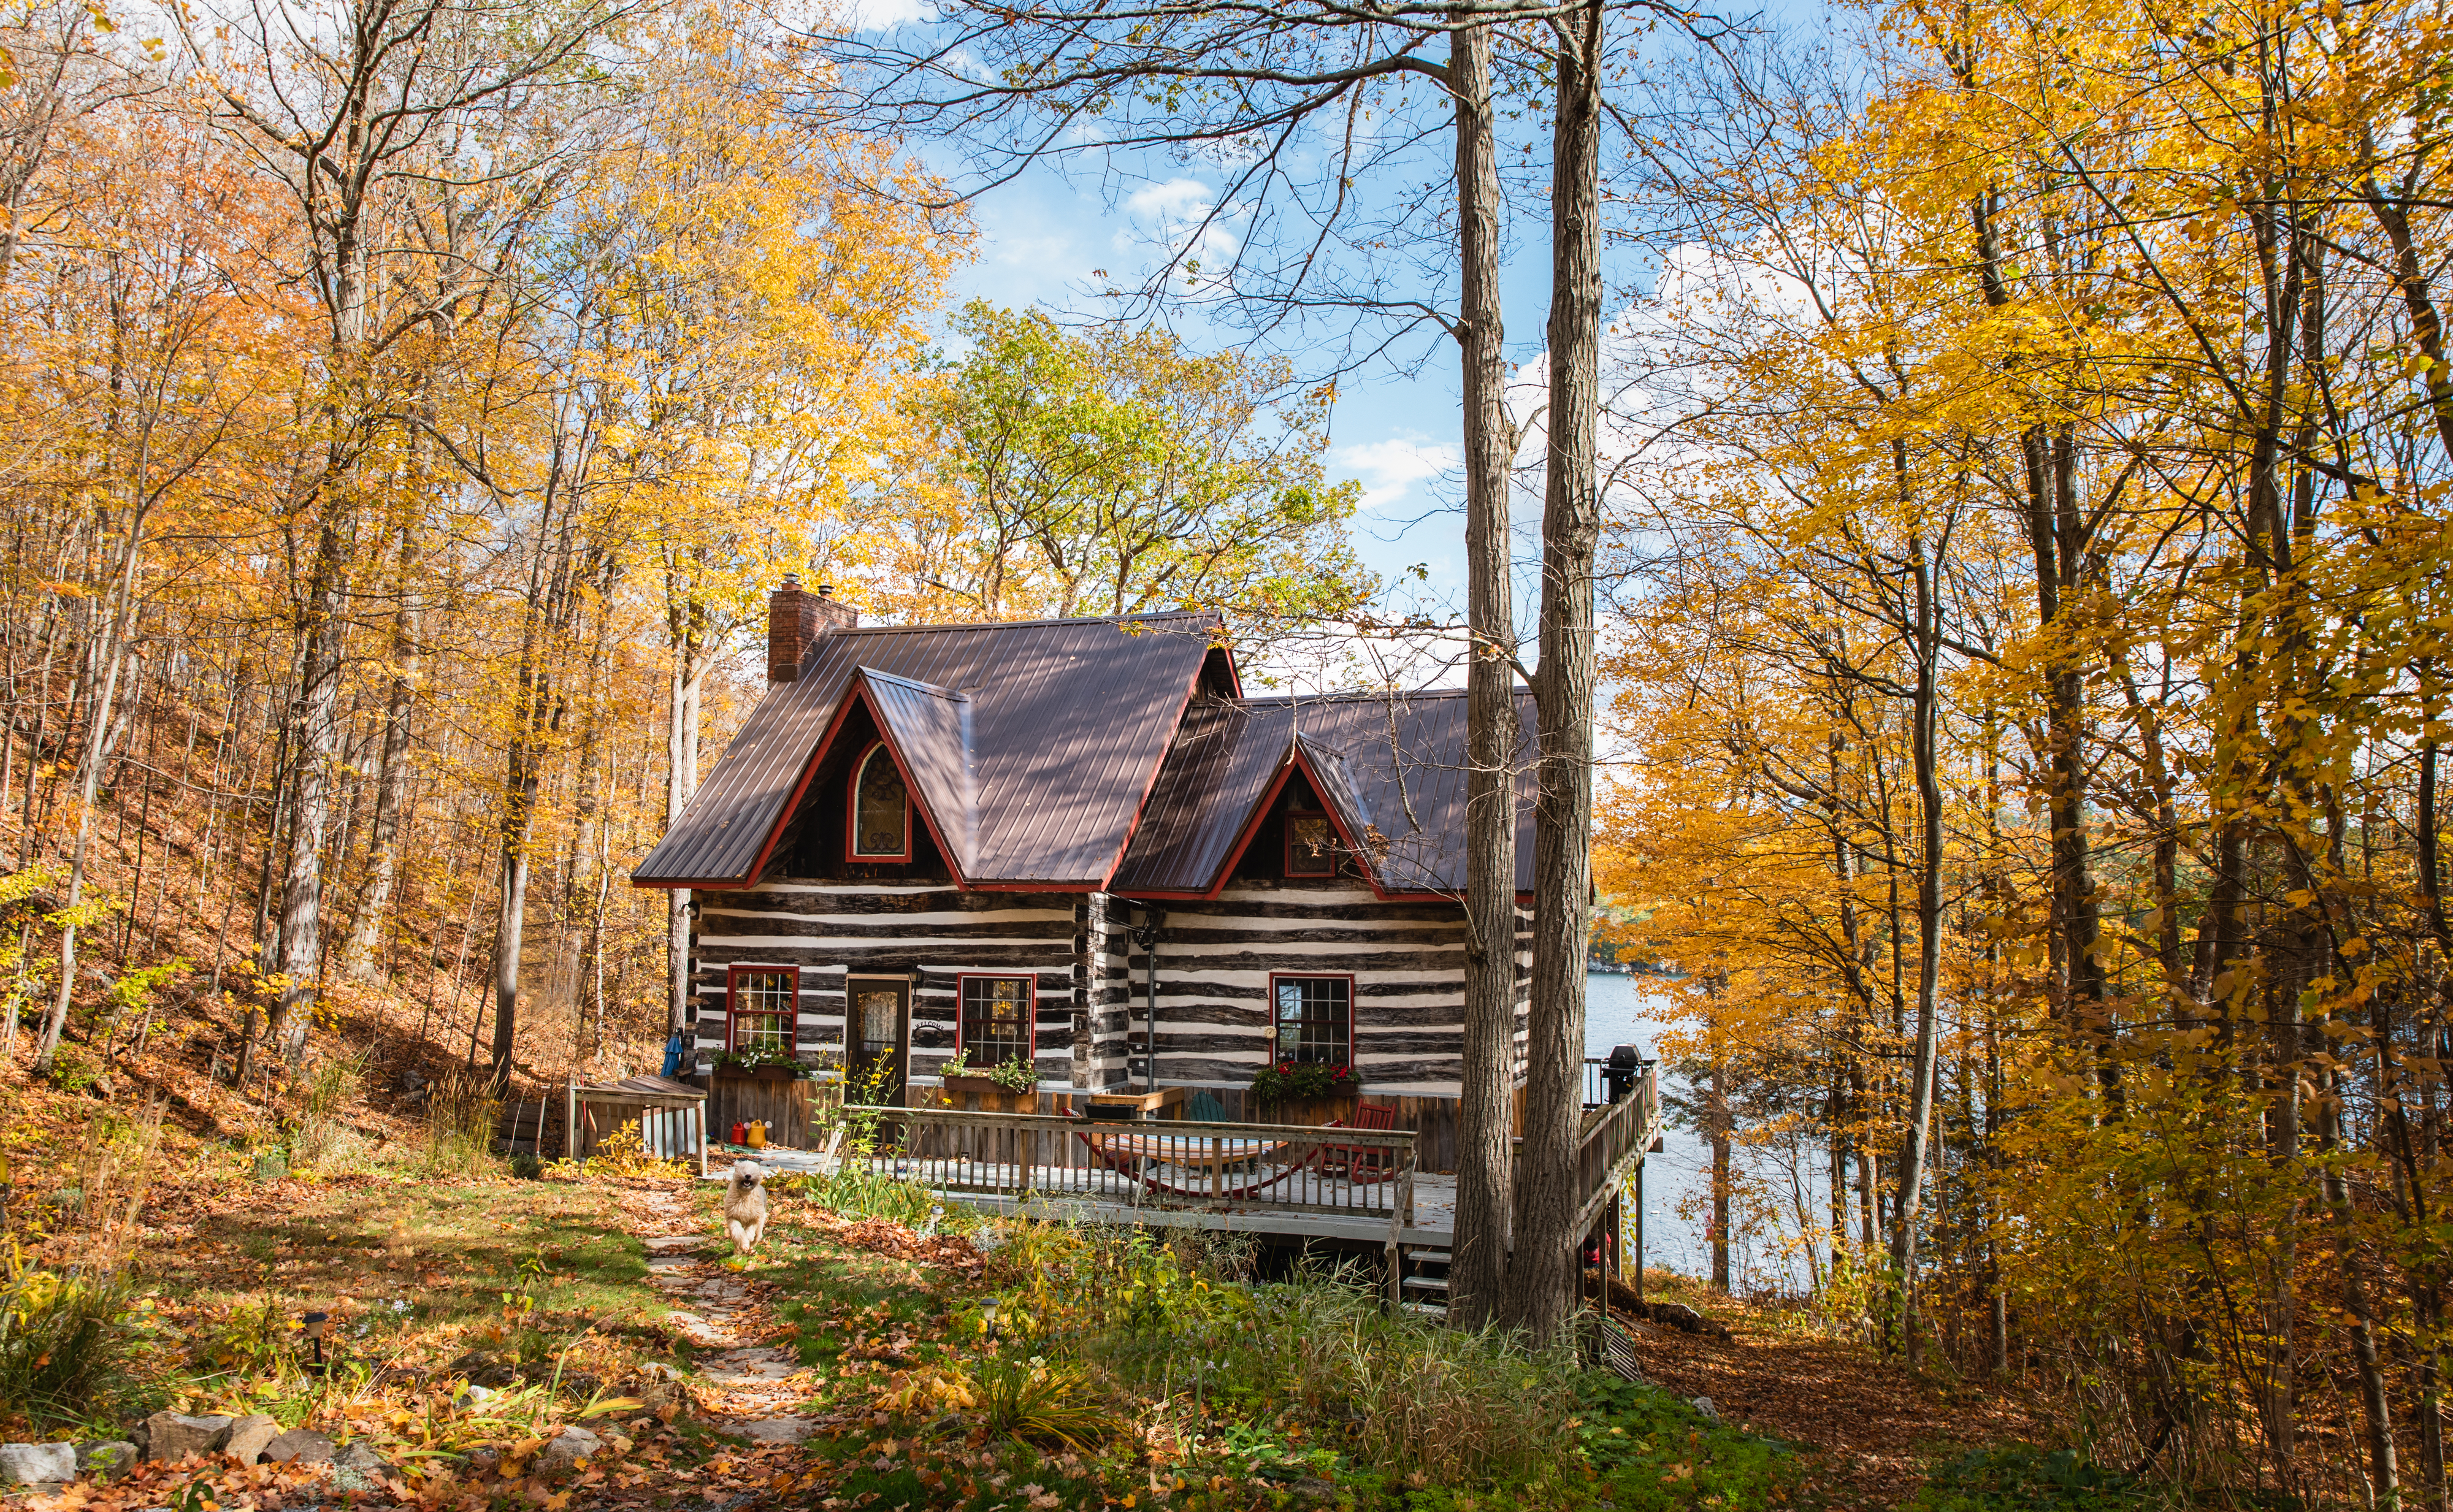 charming cabin in the woods, fall foliage surrounds